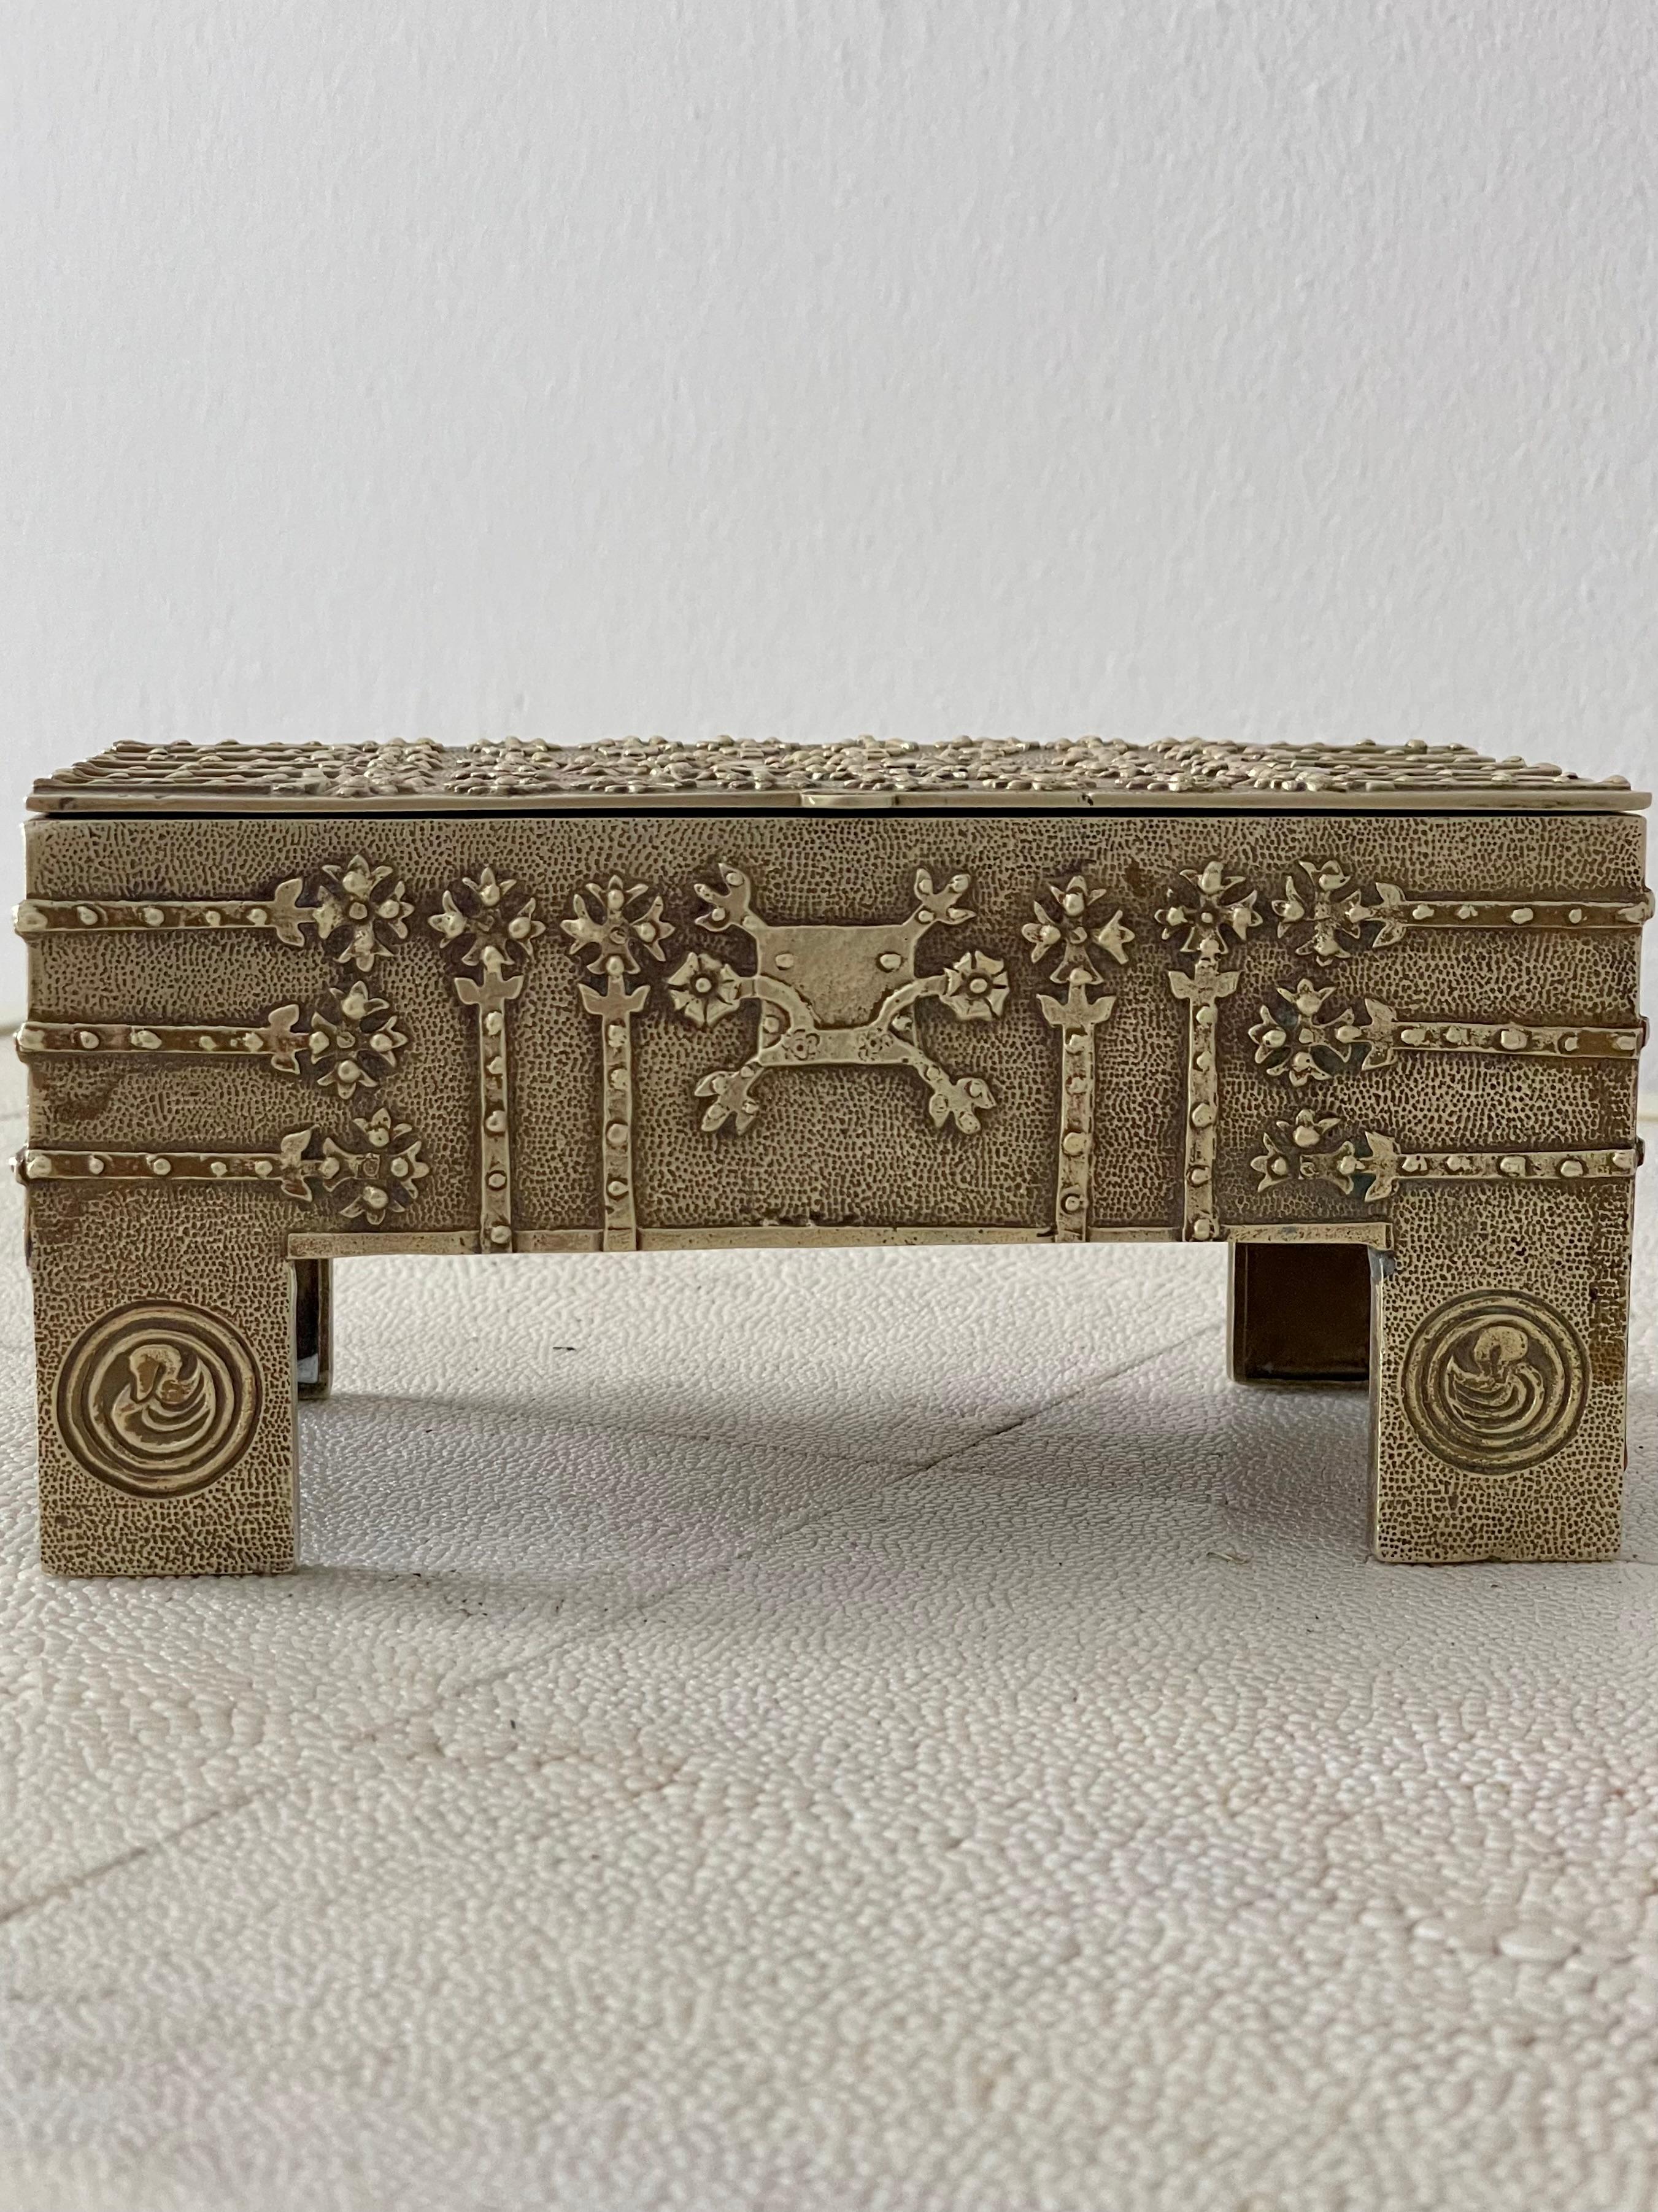 Brutalist Hammered Brass Box or Jewelry Casket For Sale 11